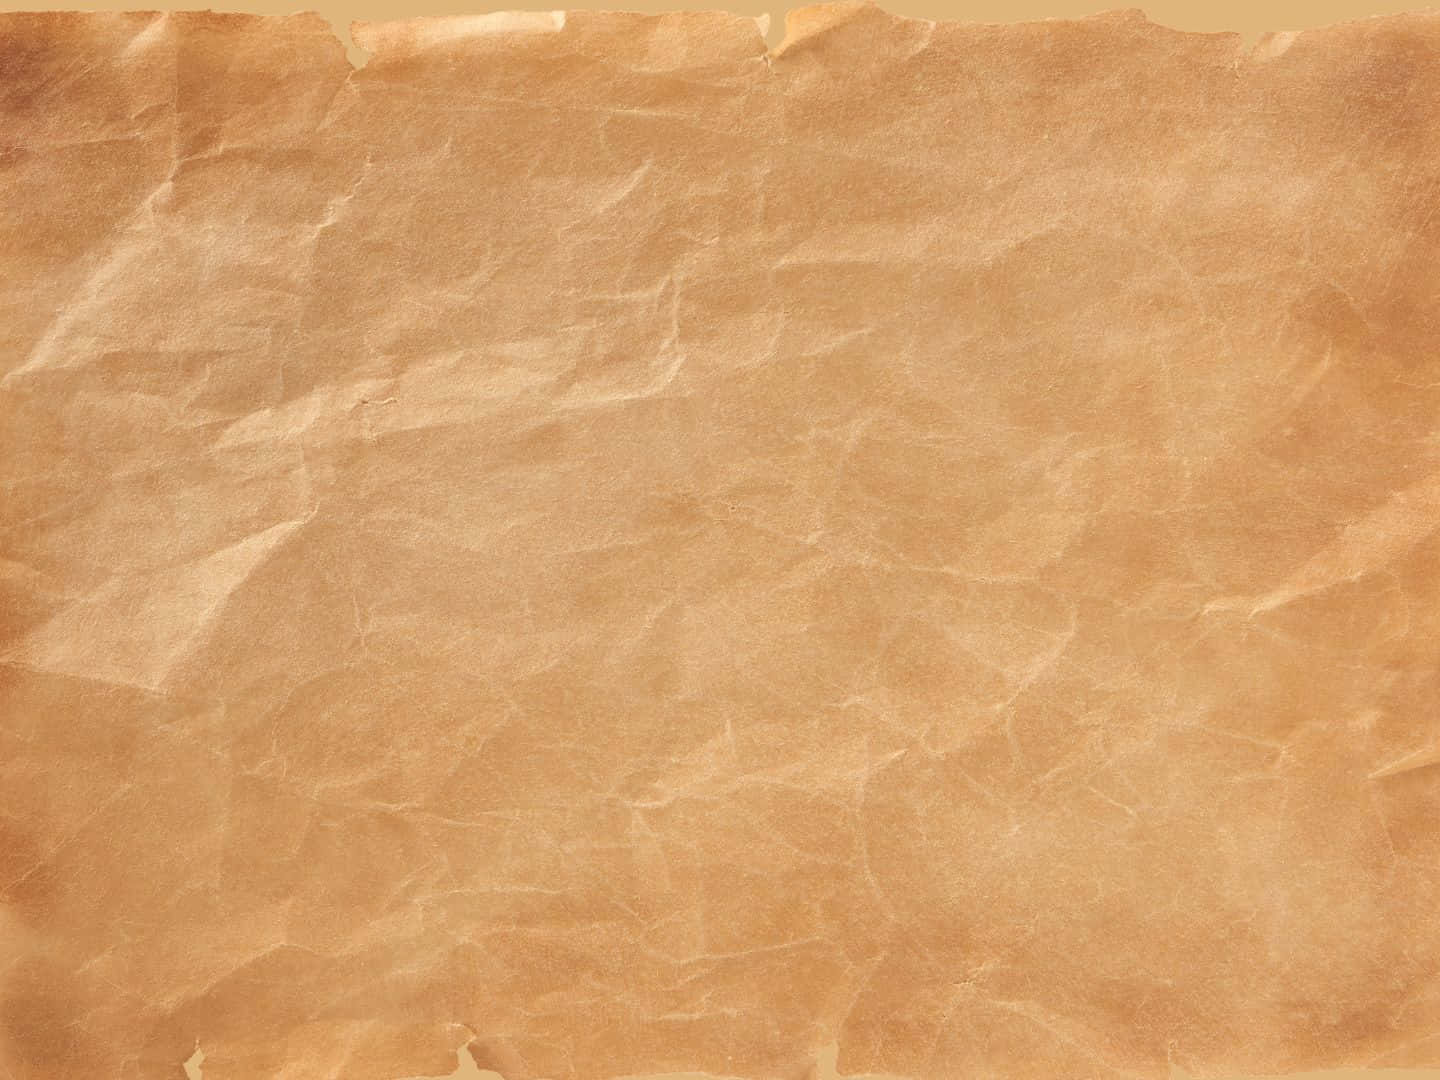 Parchment Background With Creases And Folds